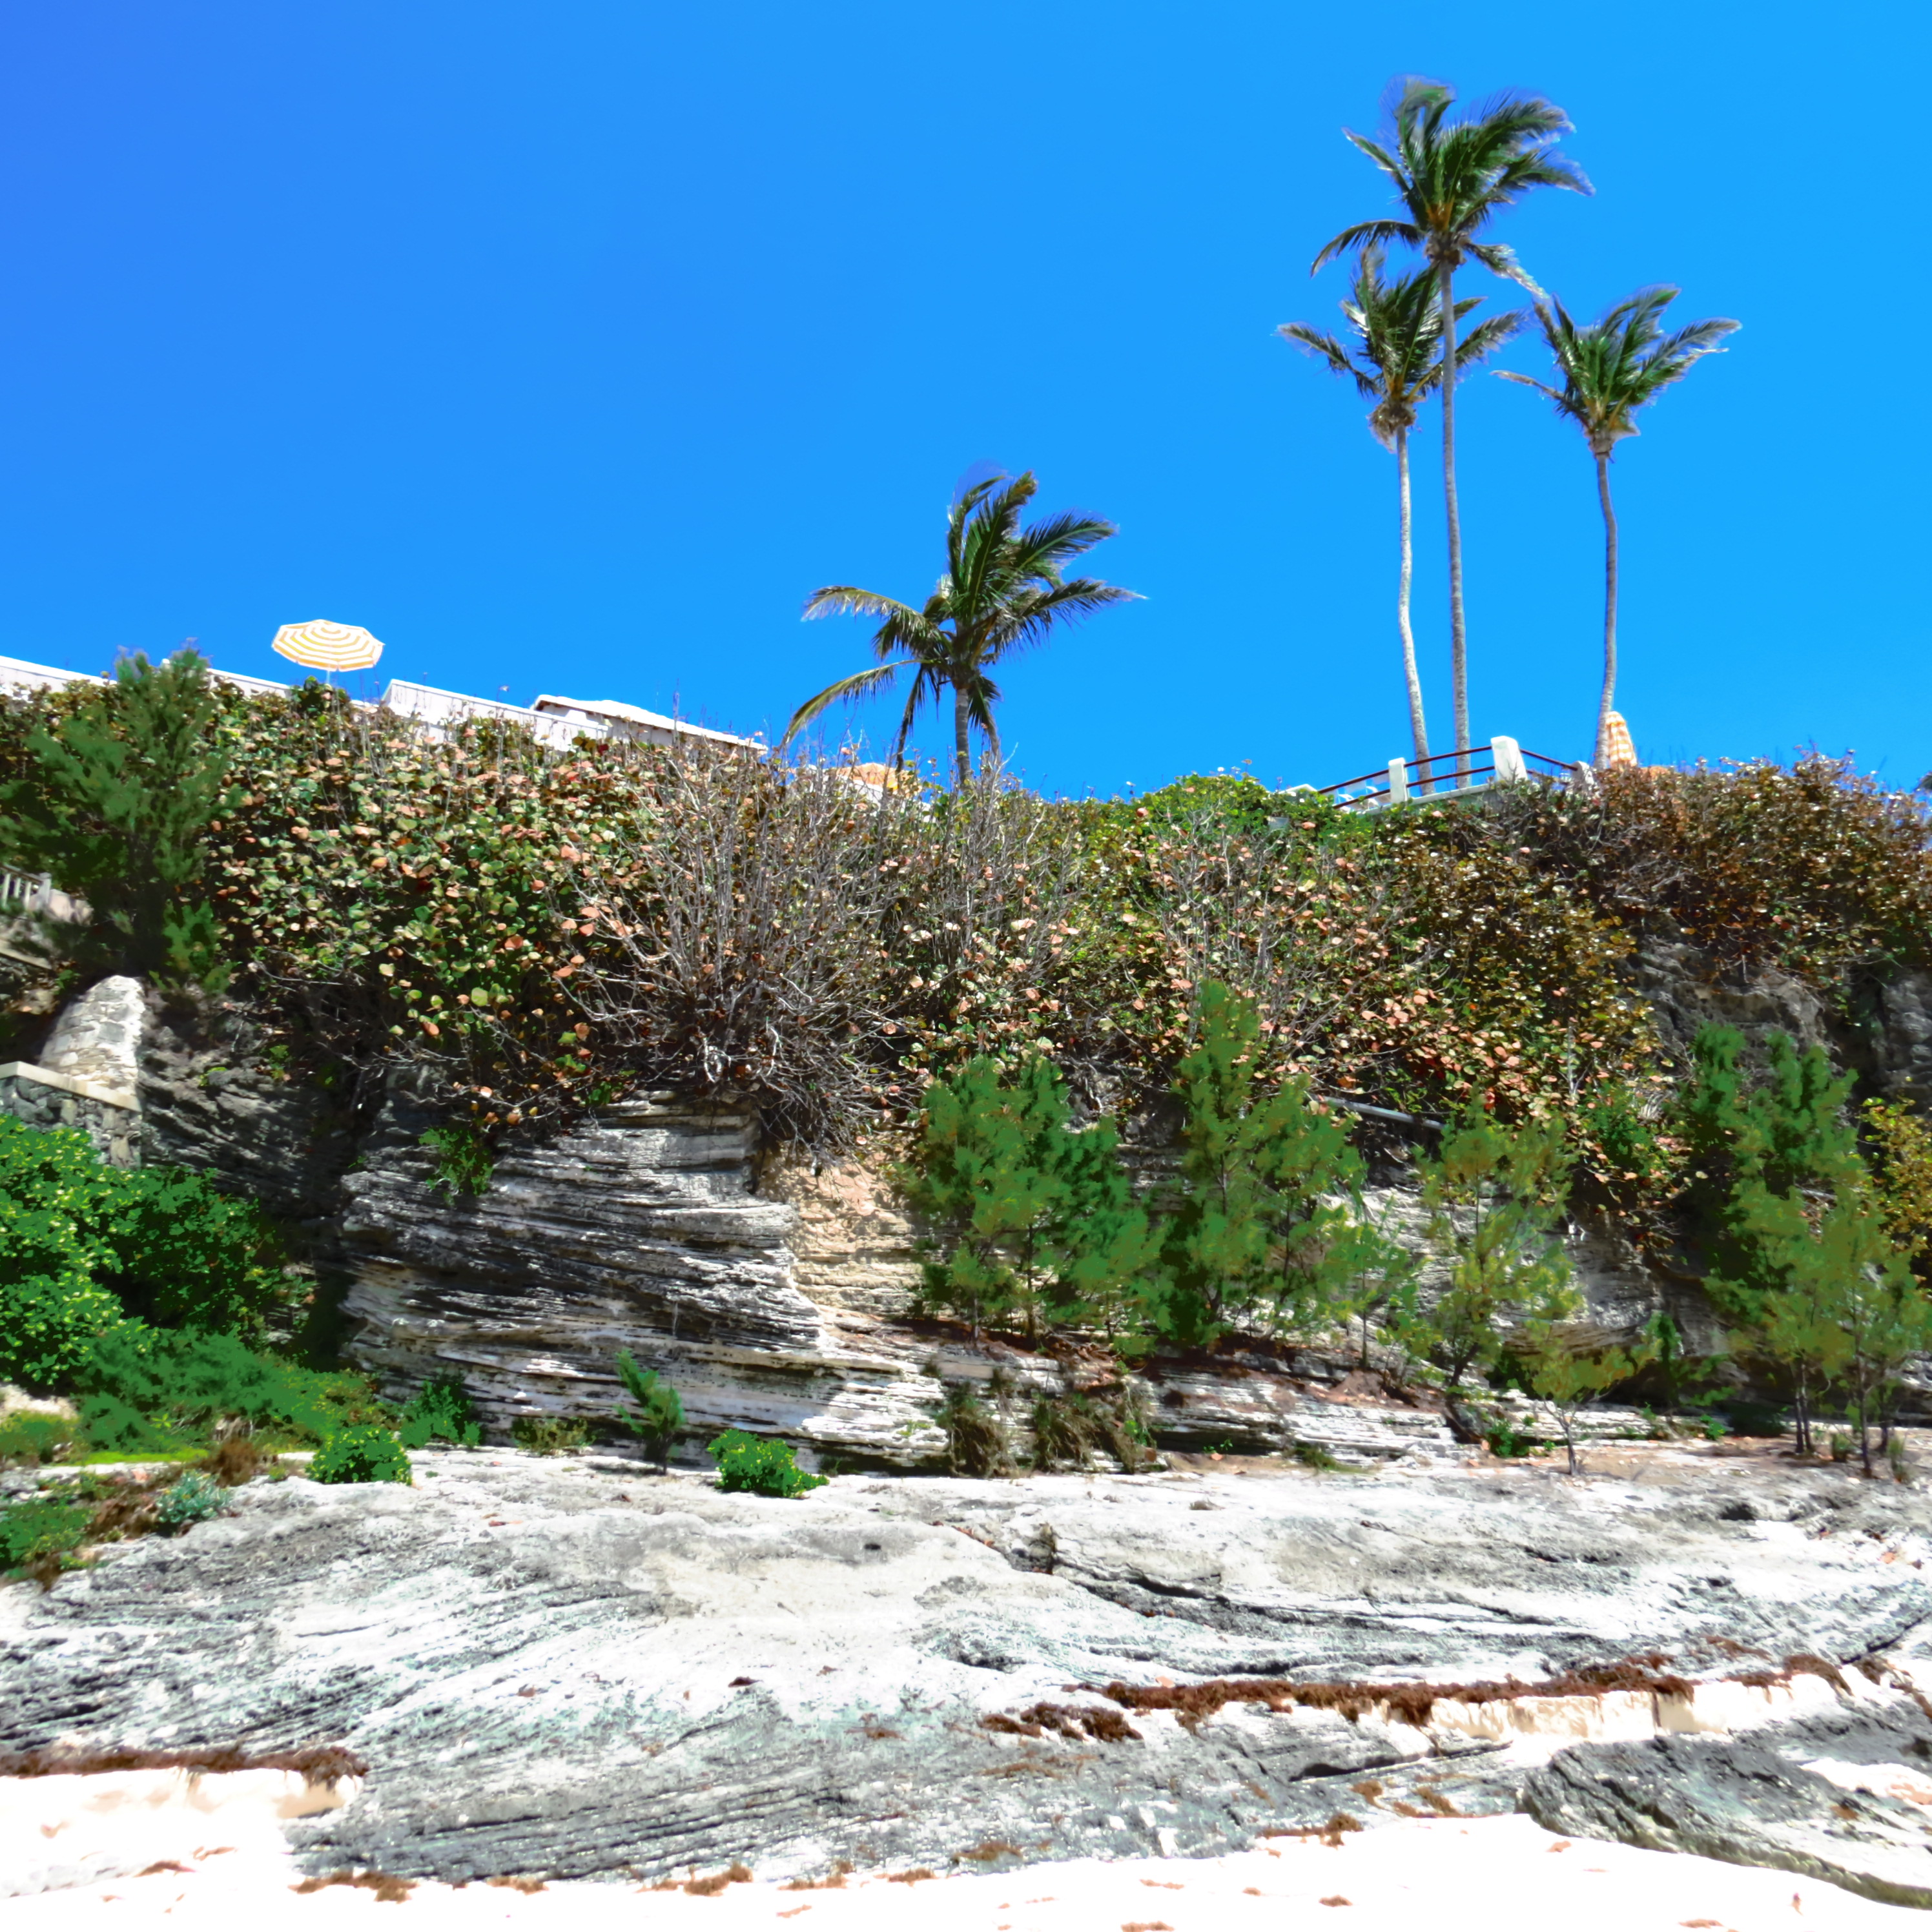 New Bermuda Destination Wedding Location and How to Plan Your Wedding Weekend There!